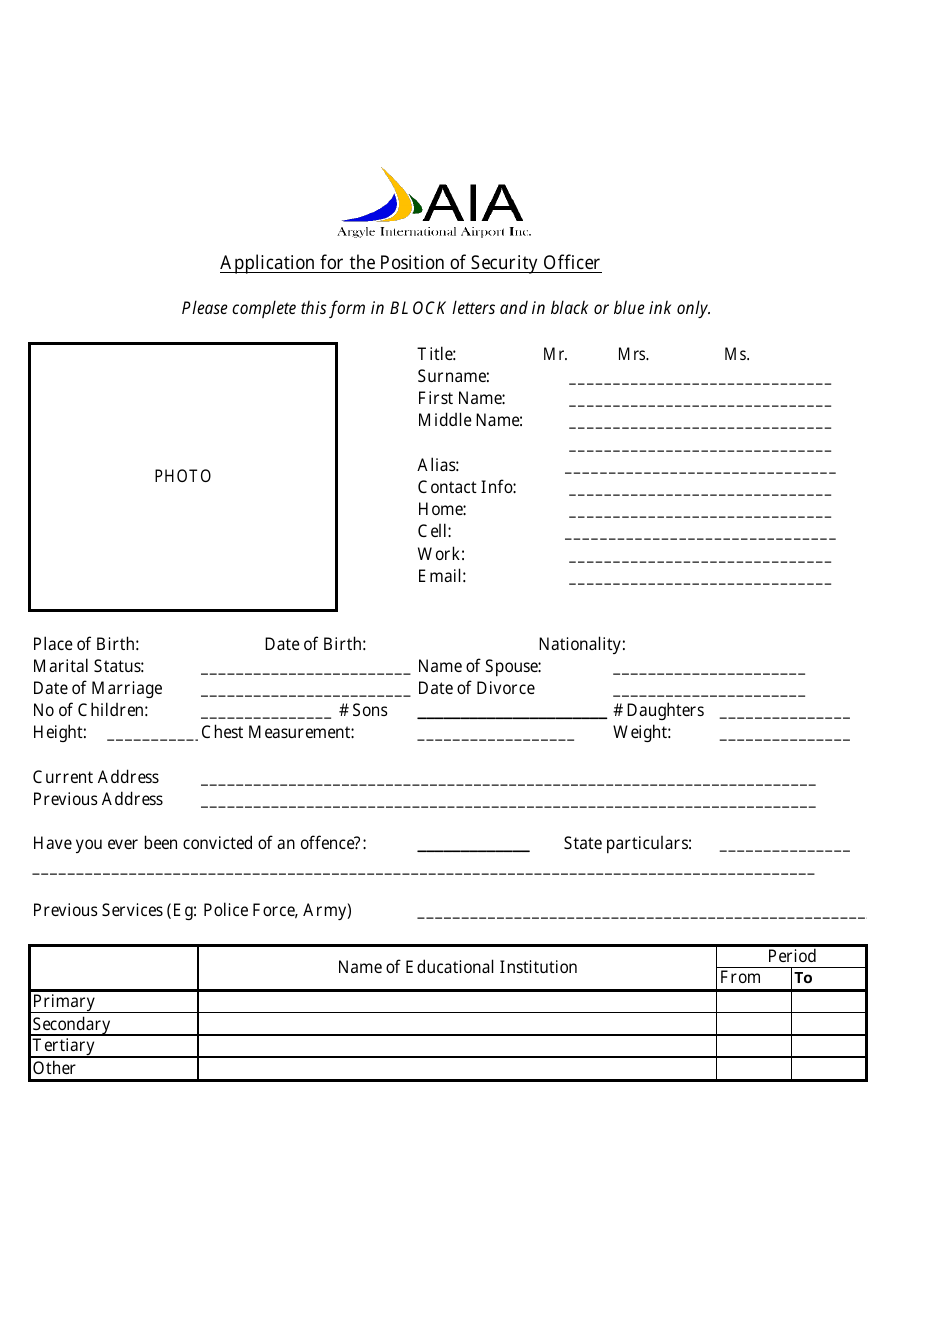 Application for the Position of Security Officer - AIA Document Preview